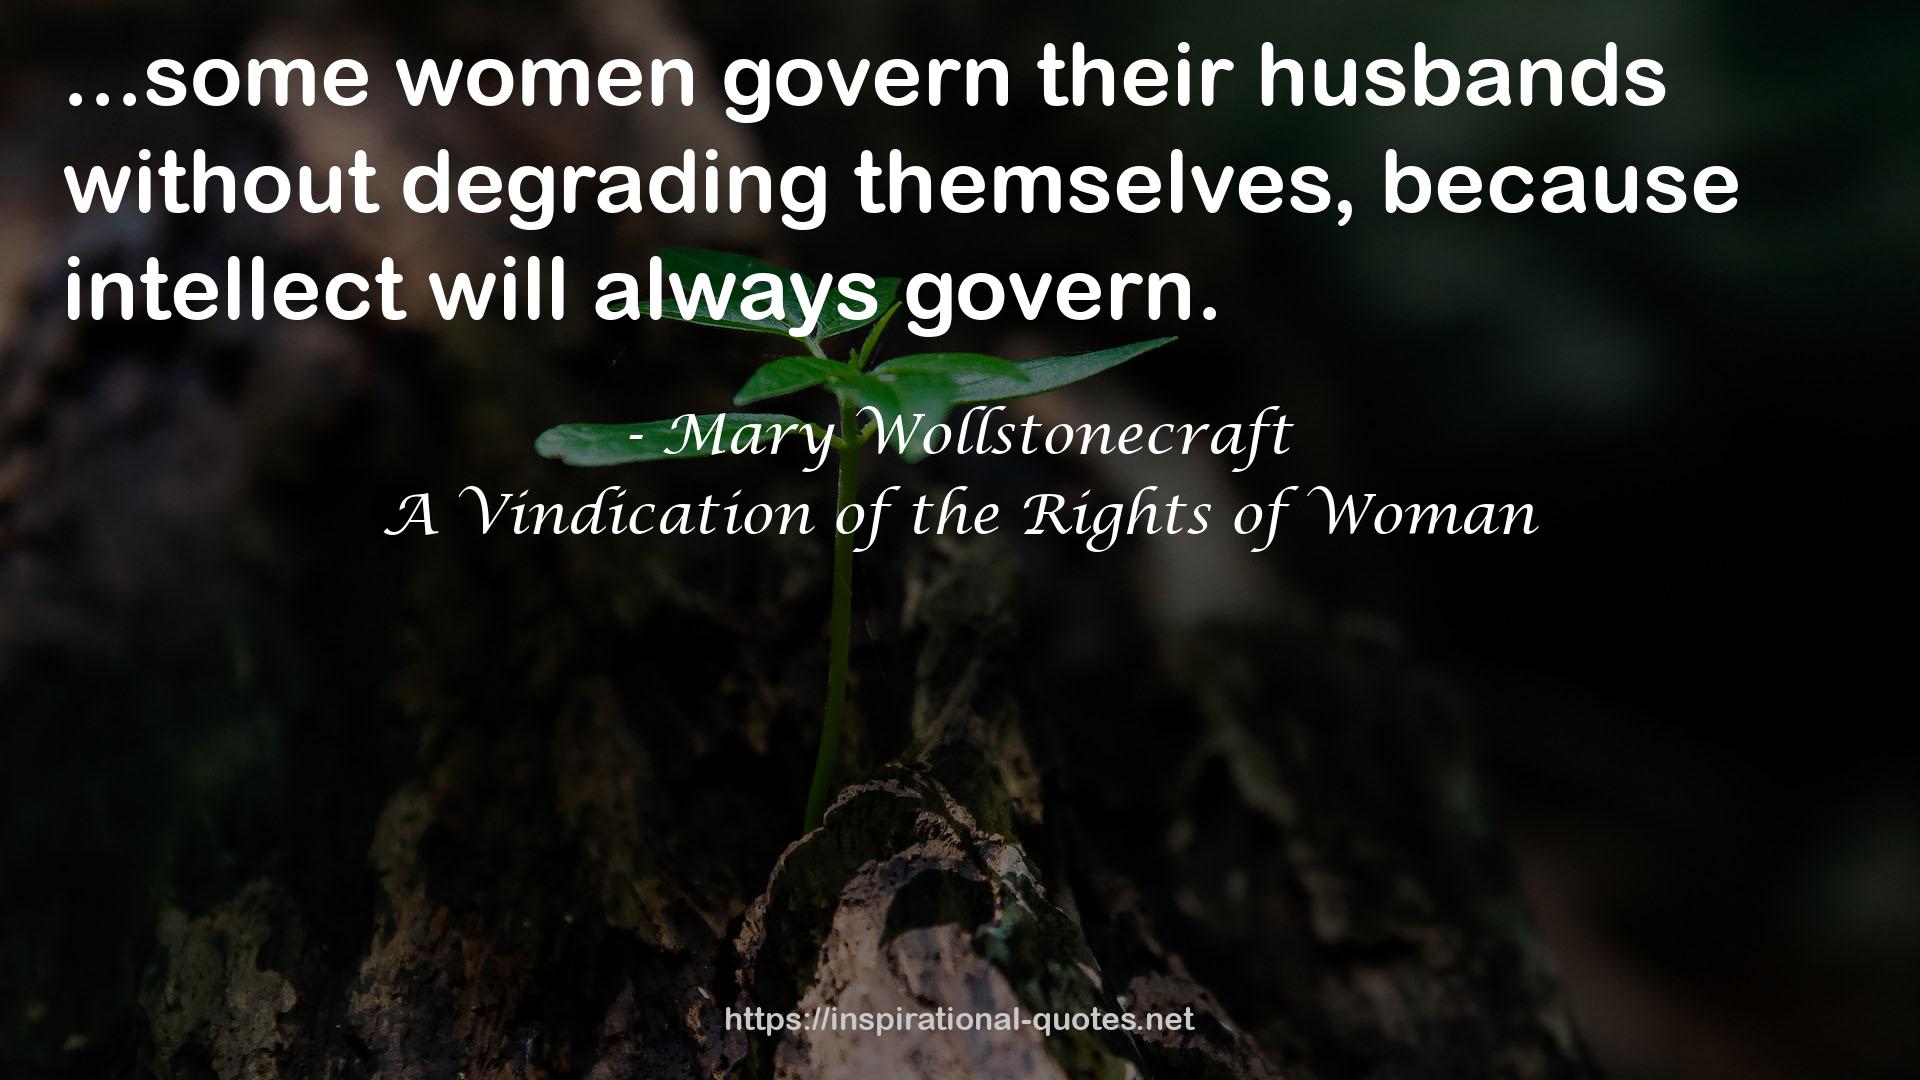 A Vindication of the Rights of Woman QUOTES